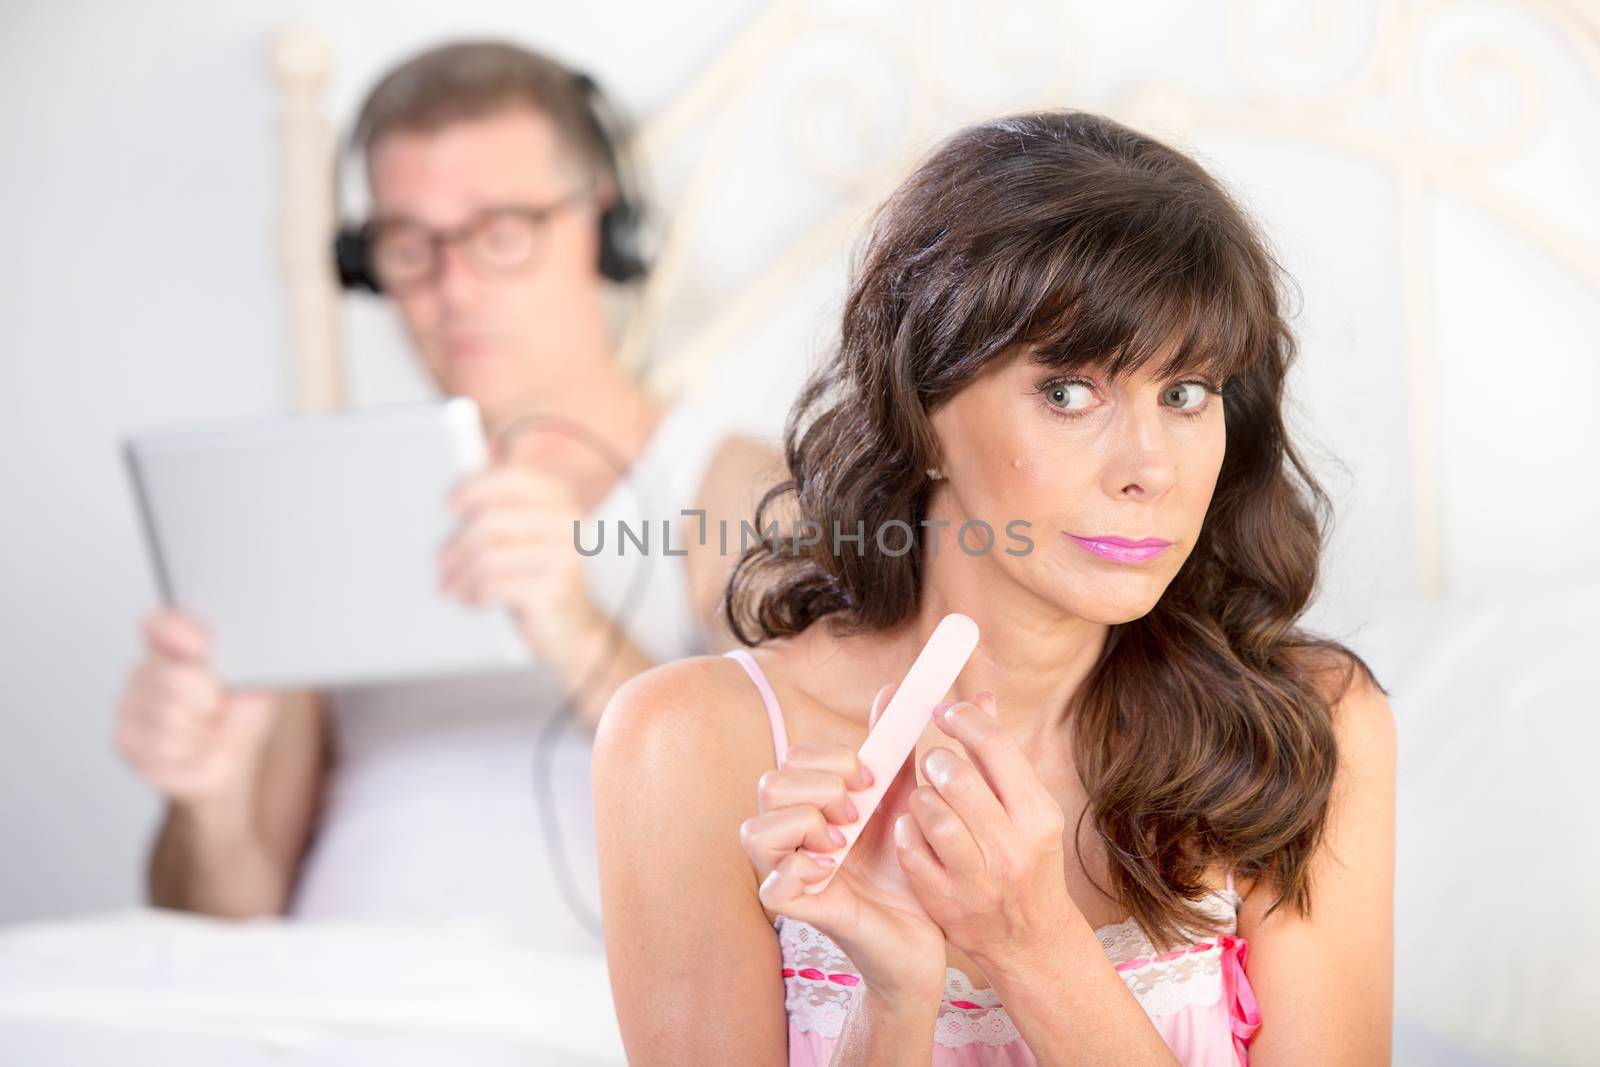 Bored Woman and Man in Bed with Computer Tablet by Creatista